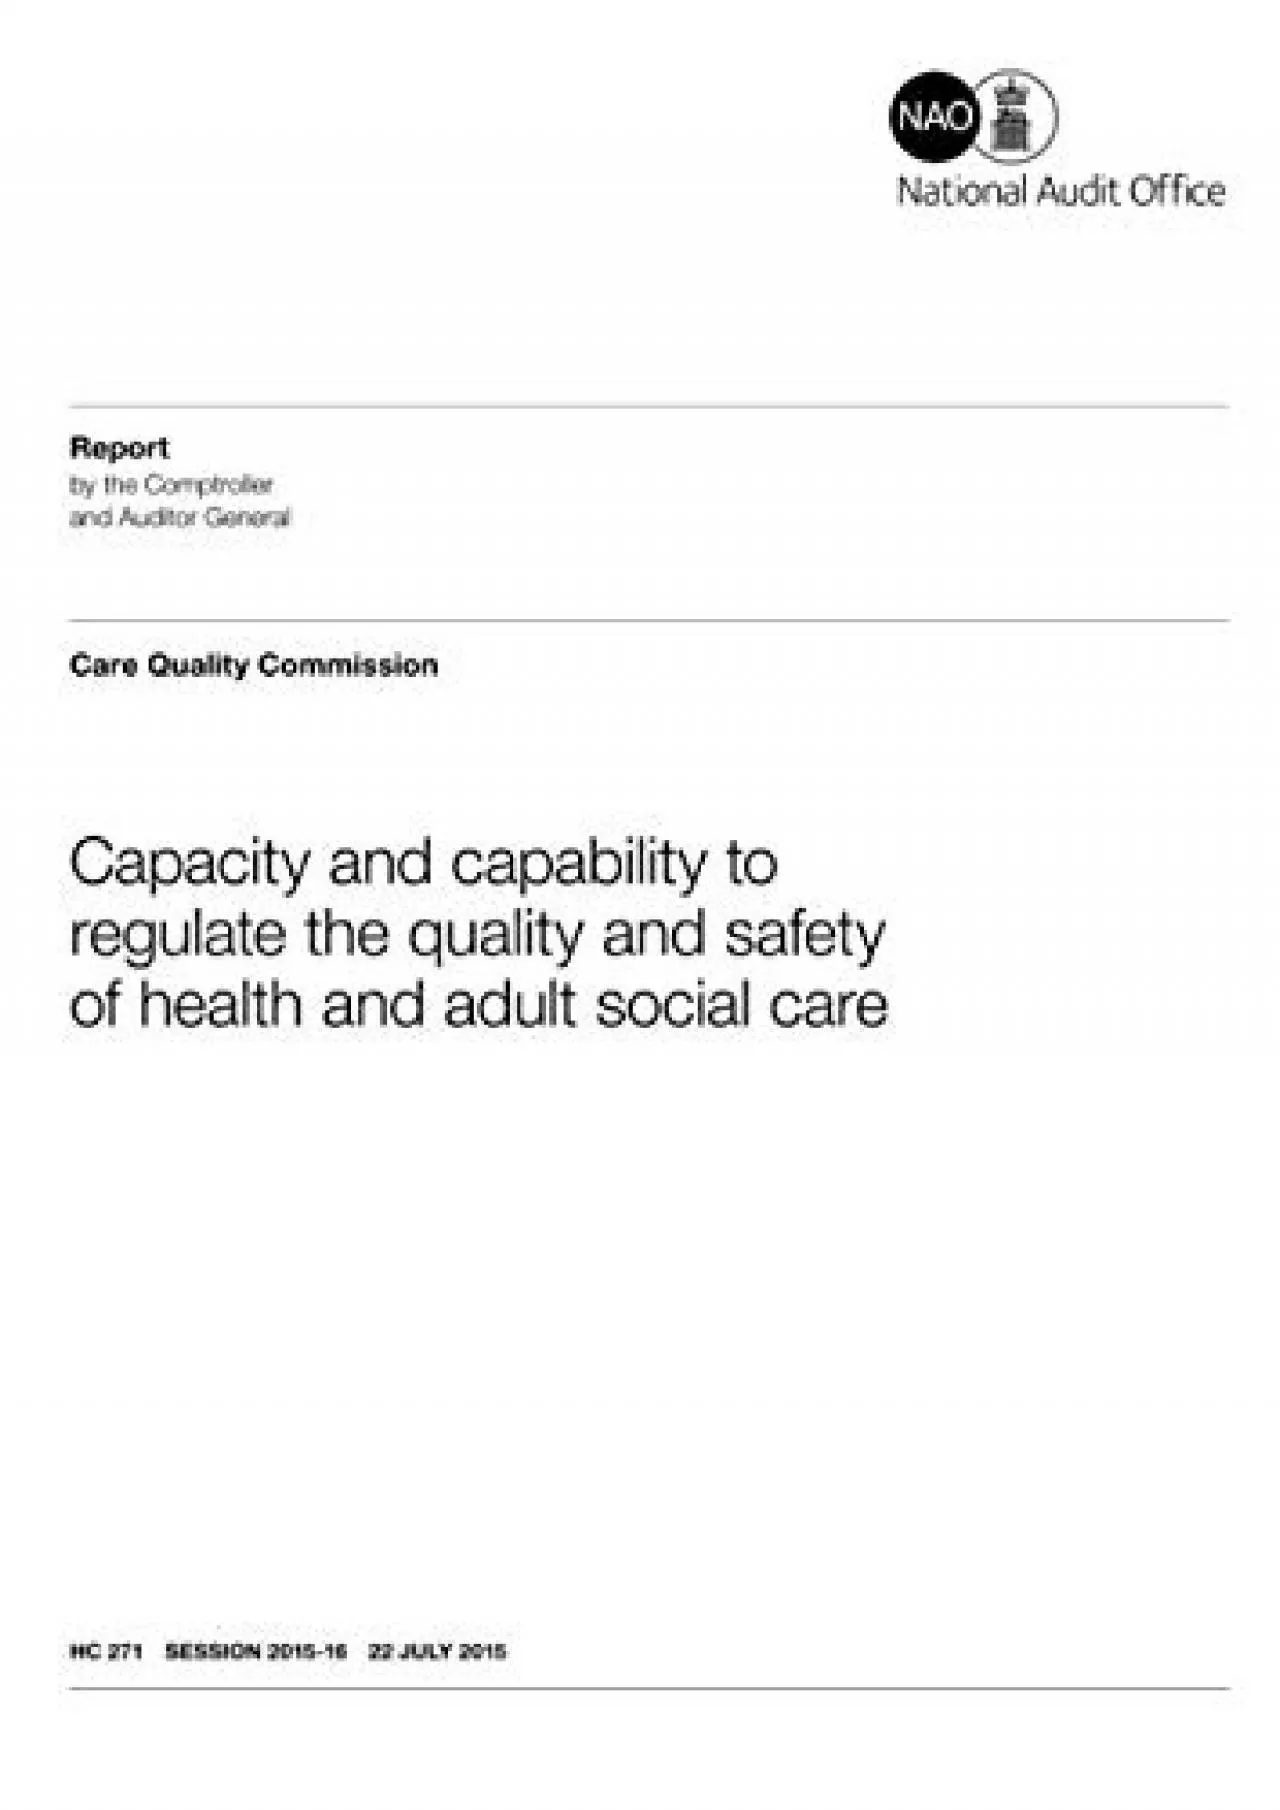 Capacity and capability to regulate the quality and safety of health and adult social